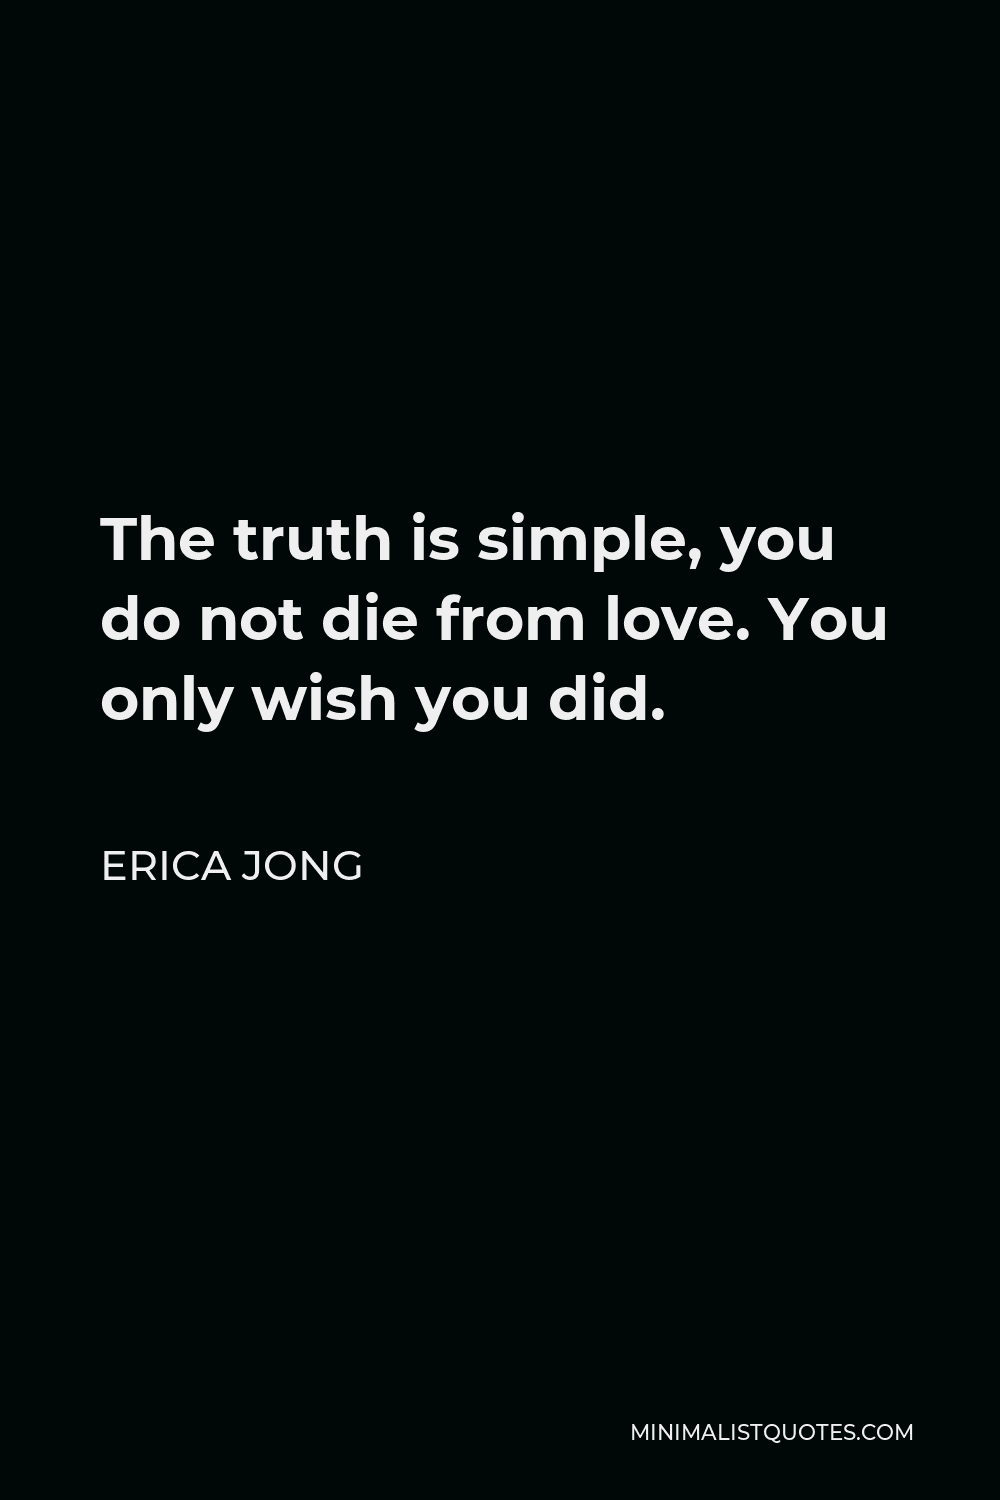 Erica Jong Quote - The truth is simple, you do not die from love. You only wish you did.